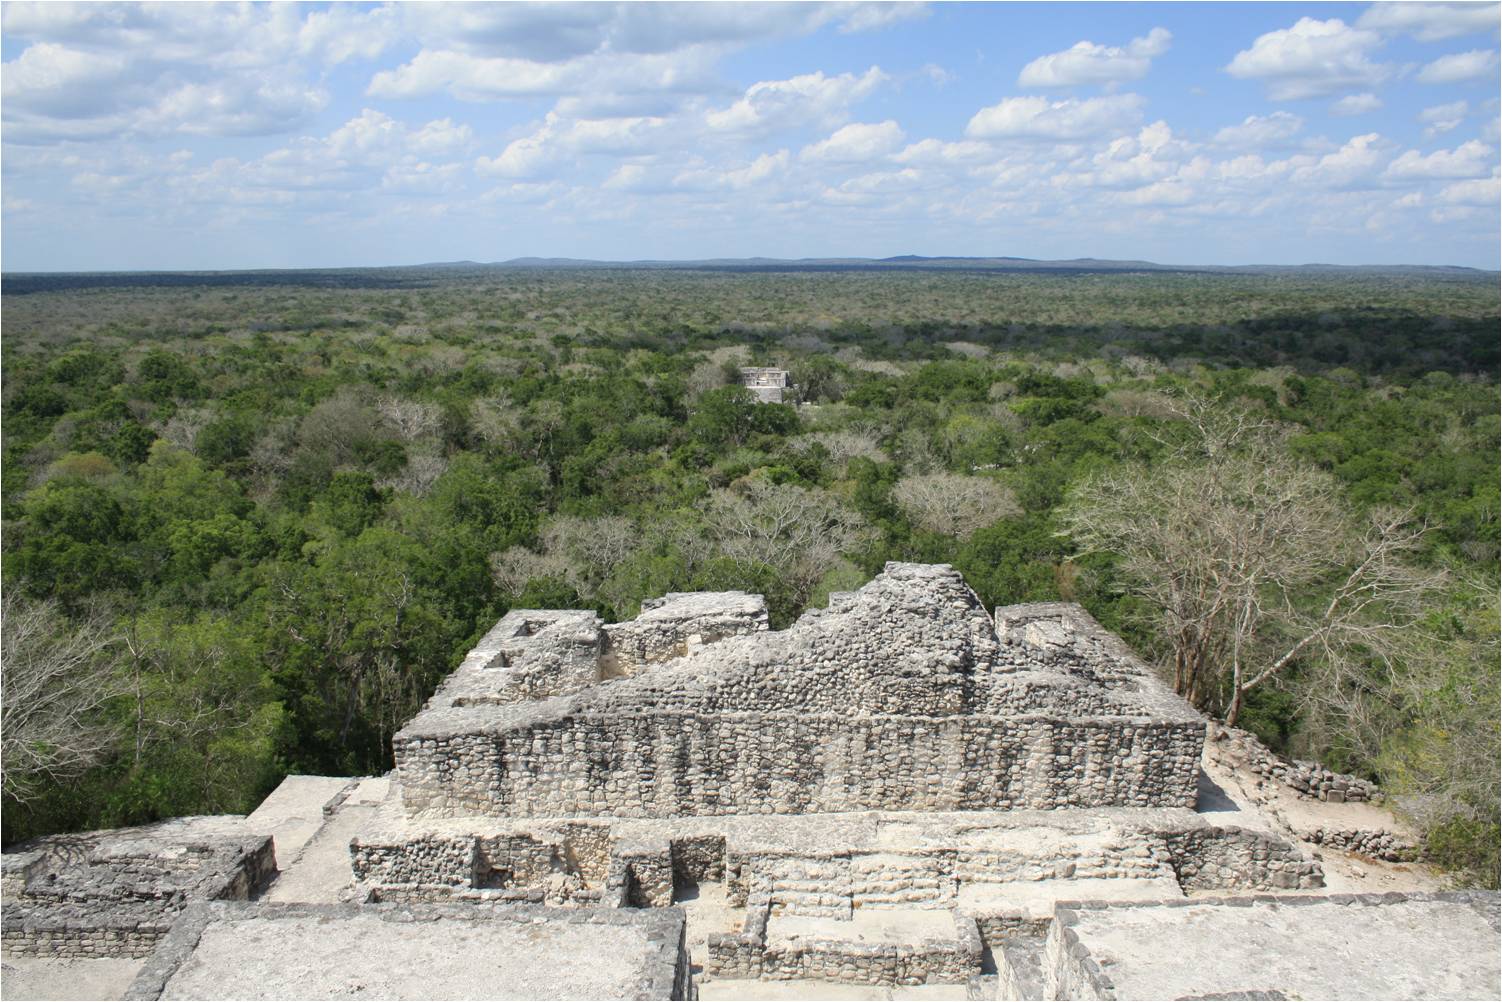 On top of Structure II in the Calakmul Biosphere Reserve